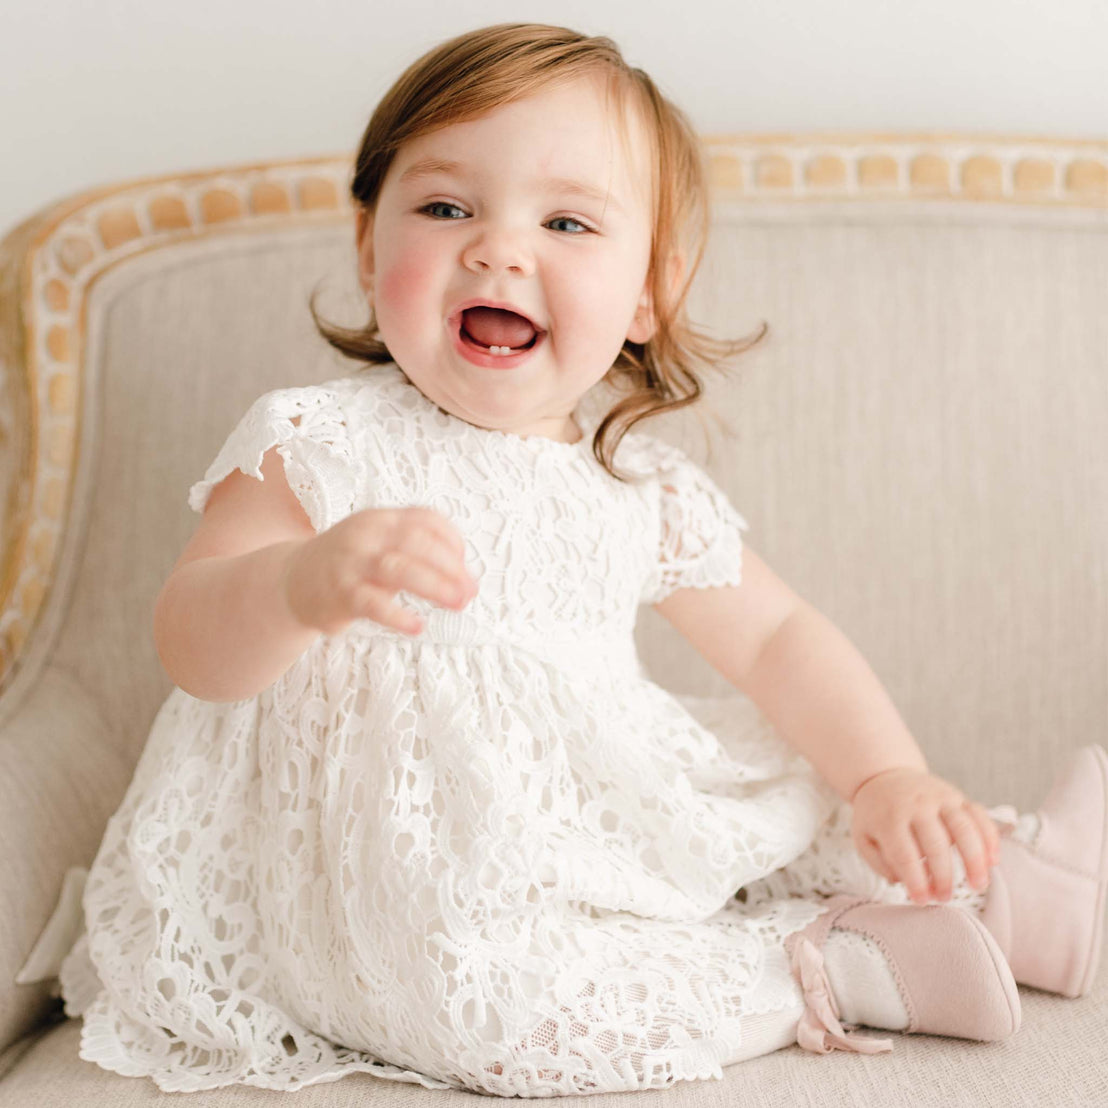 Smiling baby girl wearing the Lola Dress. Dress is made with cotton lining in light ivory featuring an all-over lace overlay.